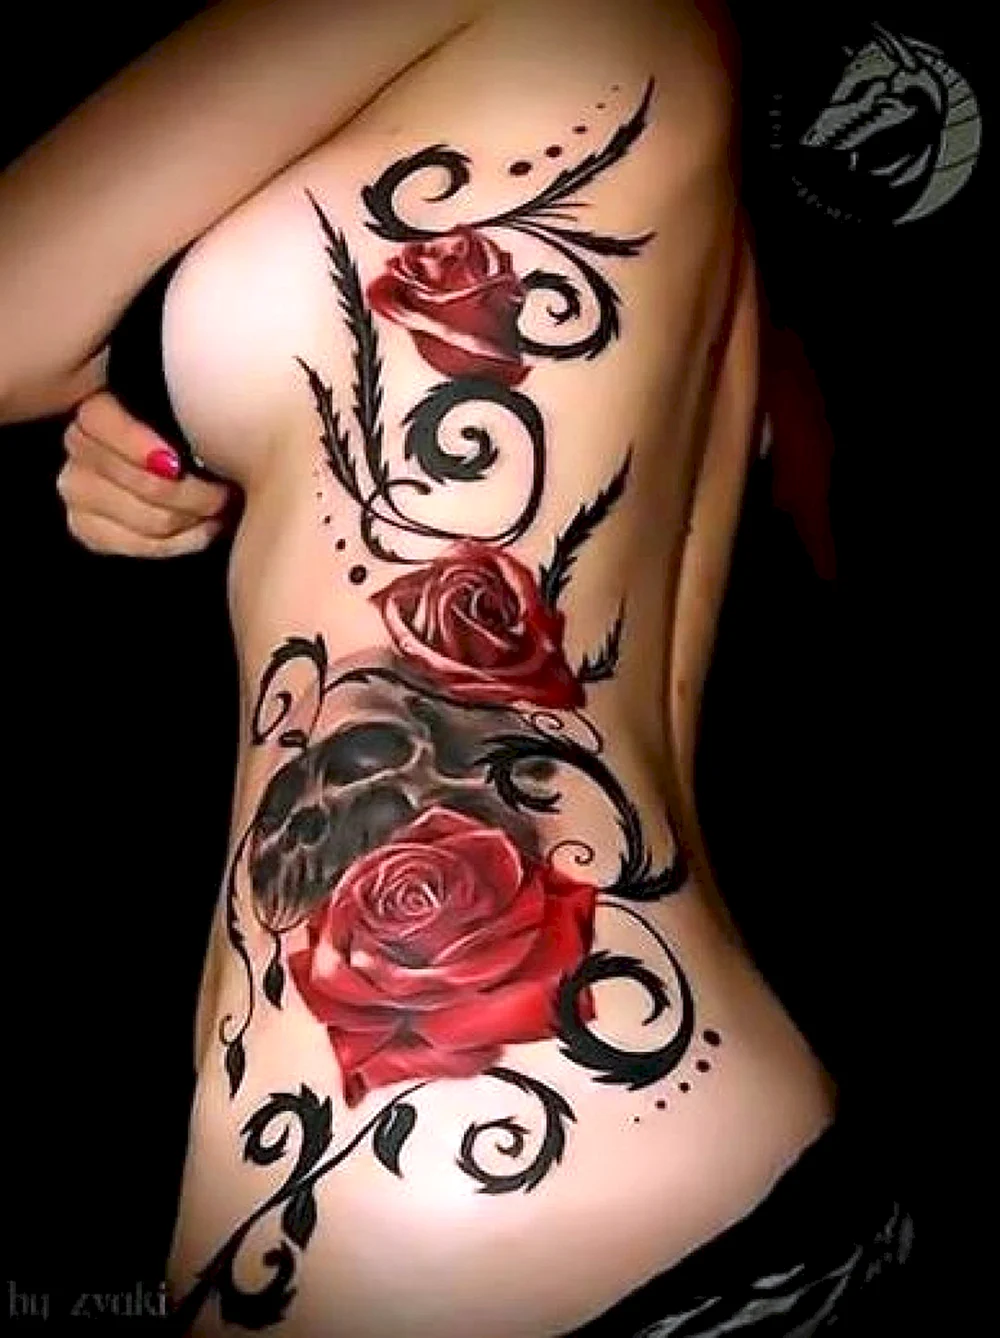 Woman and Roses Tattoo